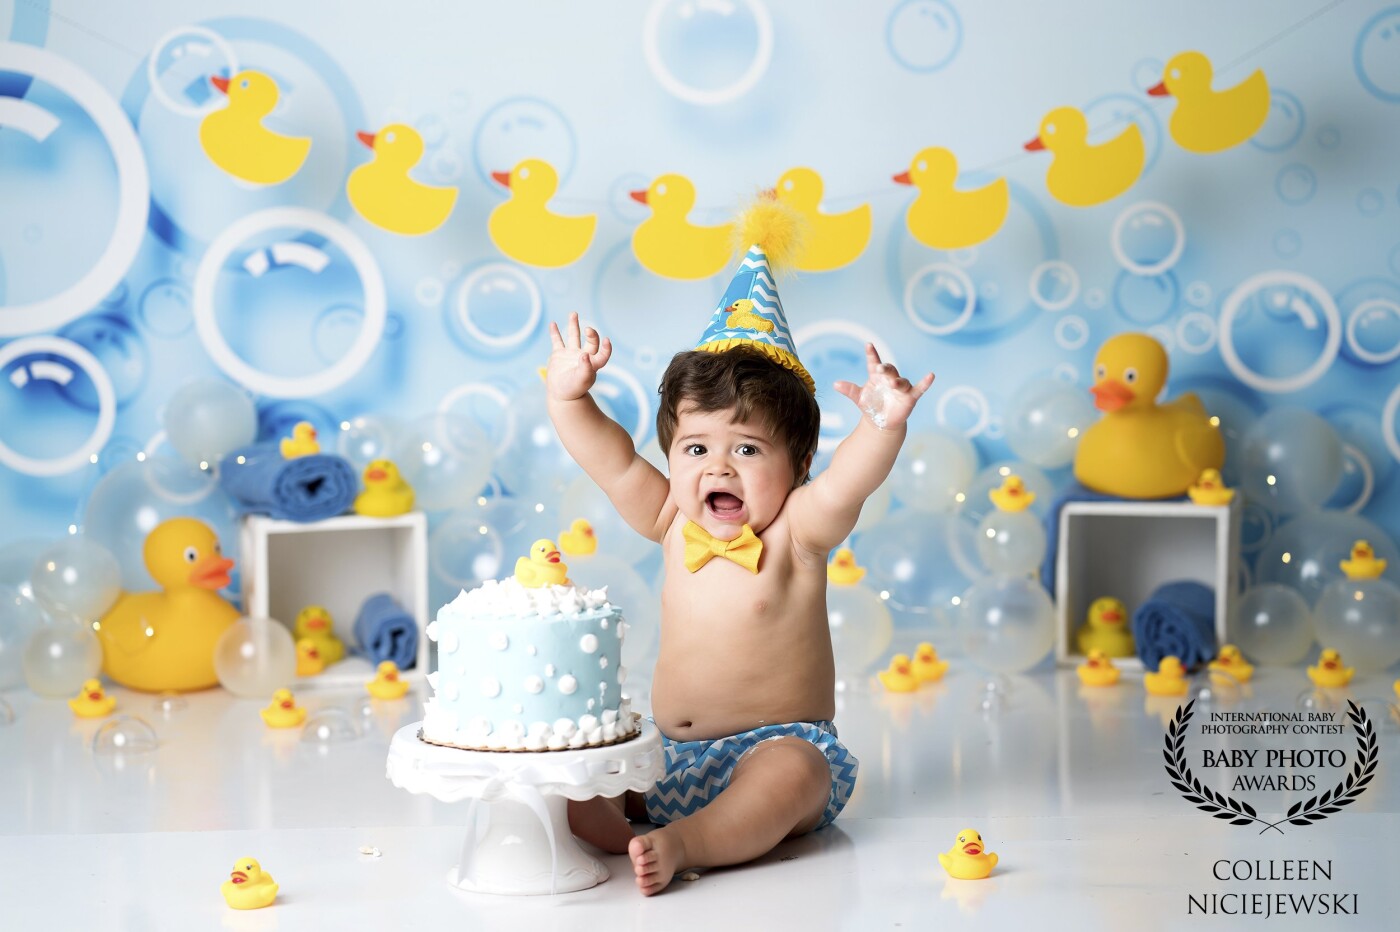 How big? SOOO BIG! ... and so much excitement from this little duckling. He just couldn't wait to dive right into his cake! When my client told me bath time was his favorite - I just knew this theme would be a SMASHing hit... The animated little guy was just the icing on the most perfect cake! 